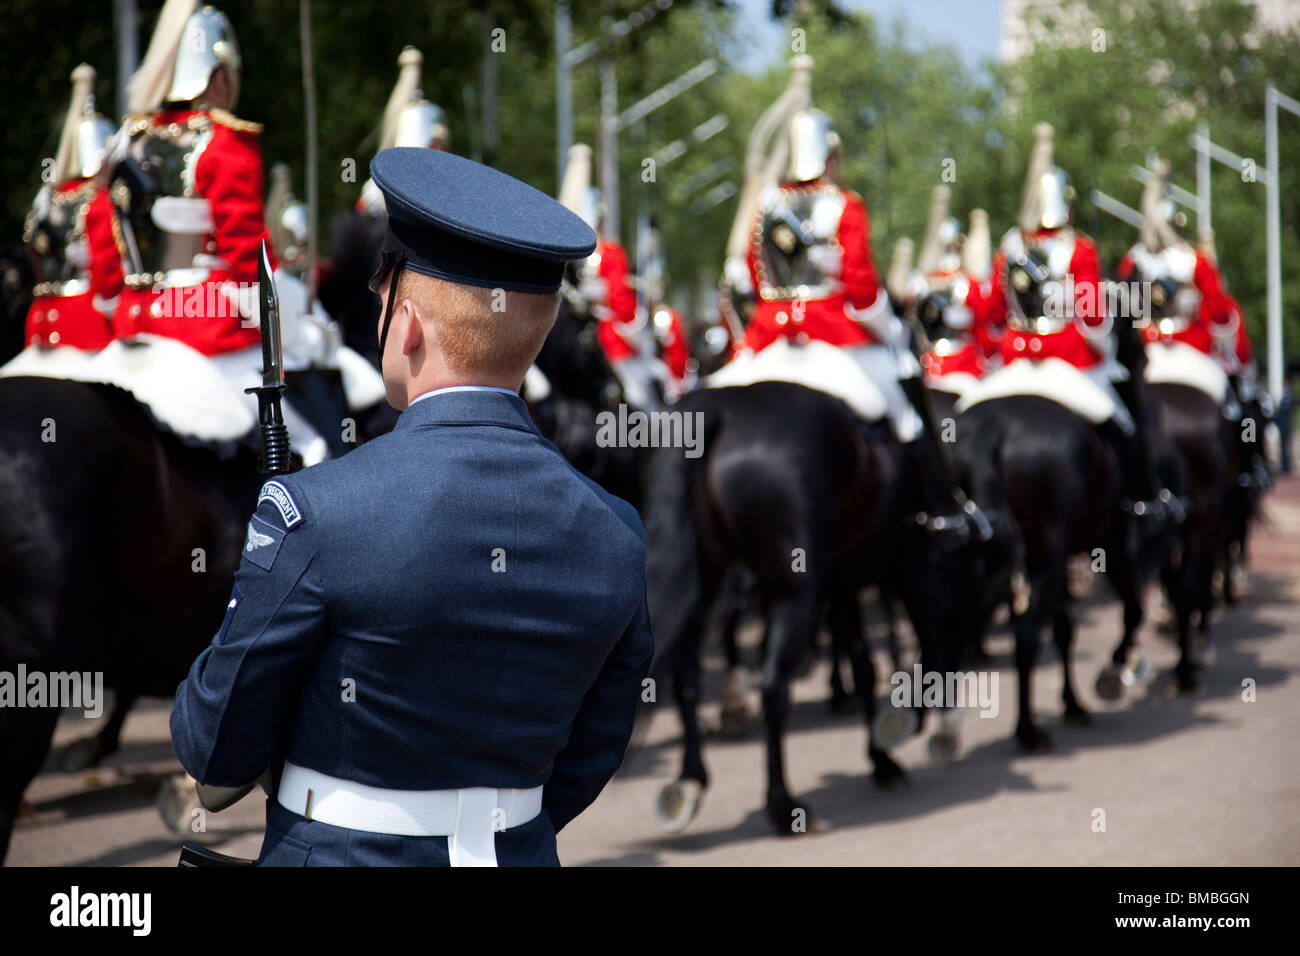 Life Guards pass as a member of the RAF Regiment stands guard. Royal procession for the State Opening of Parliament, London. Stock Photo